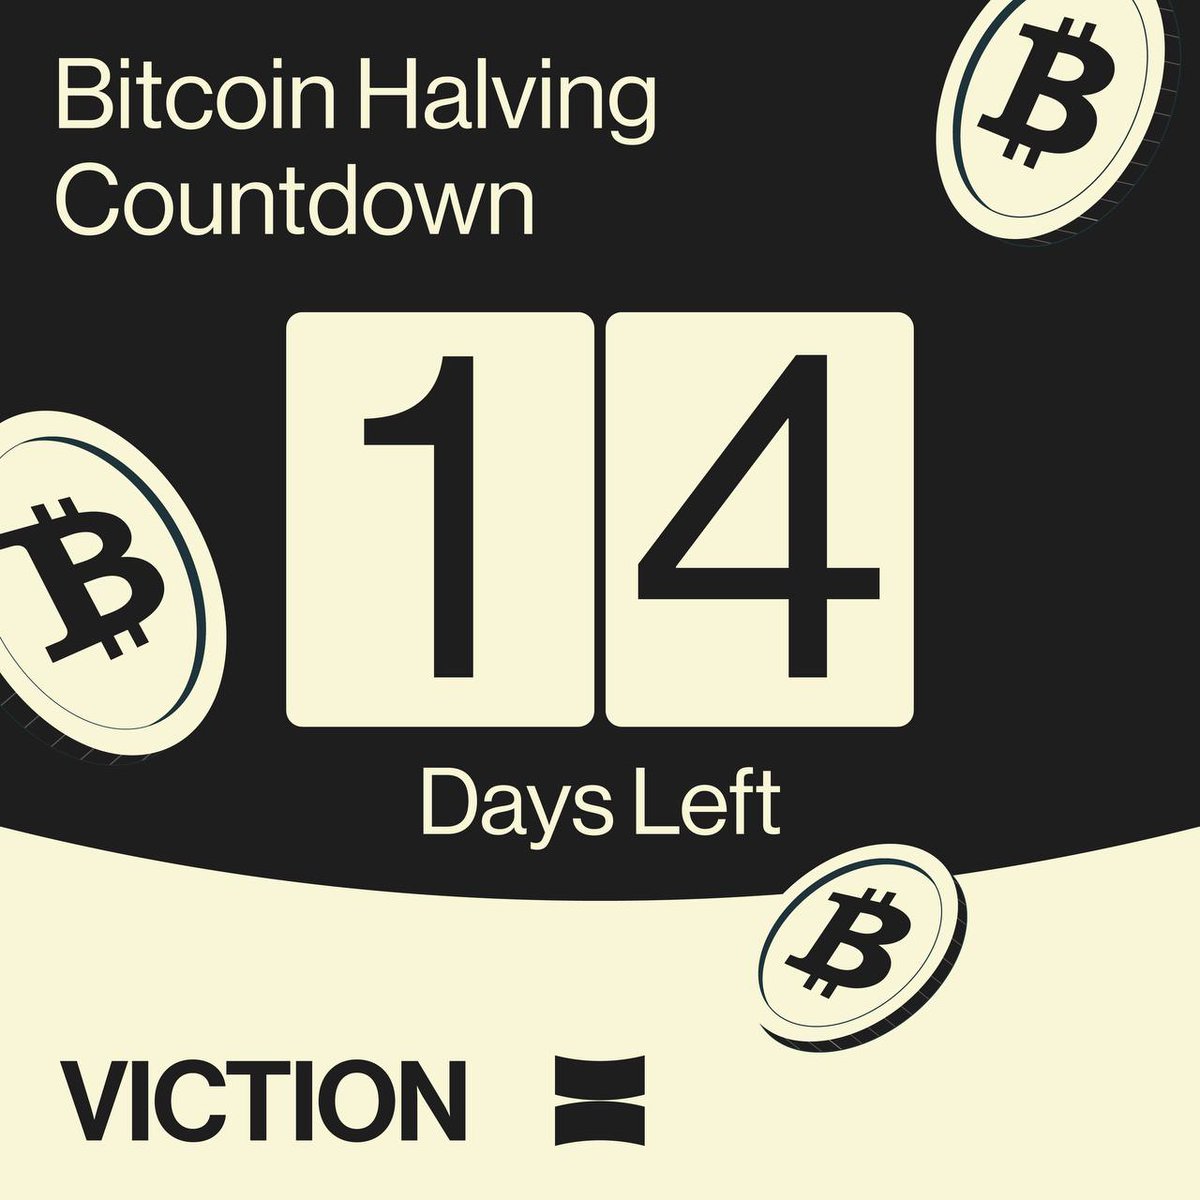 ⌛️ Let's countdown with us! #Bitcoin📷 The next #BitcoinHalving is expected to take place this April and around 14 days left.